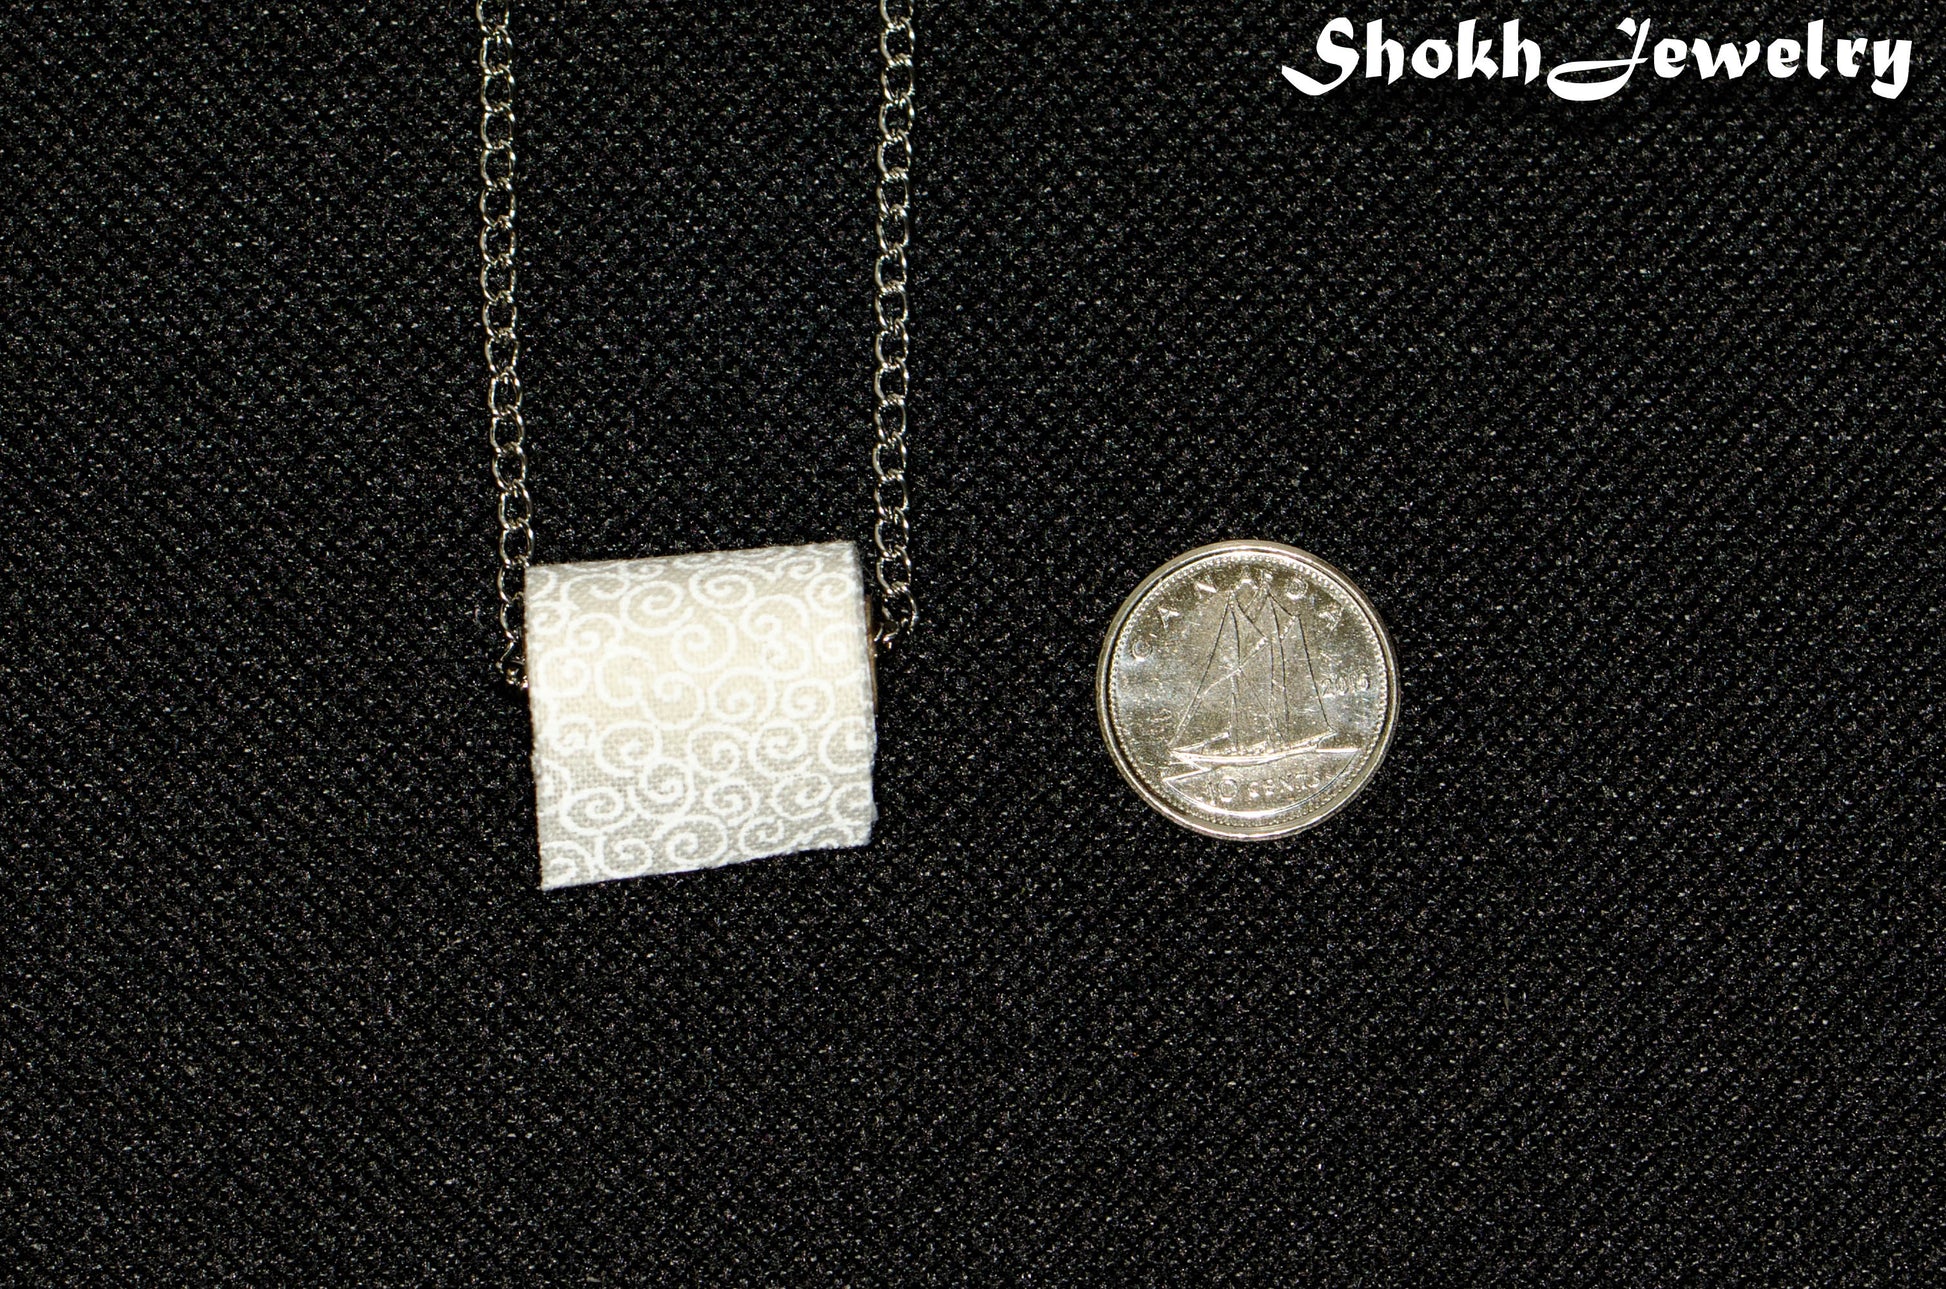 Miniature Toilet Paper Roll and Dainty Chain Choker Necklace beside a dime.